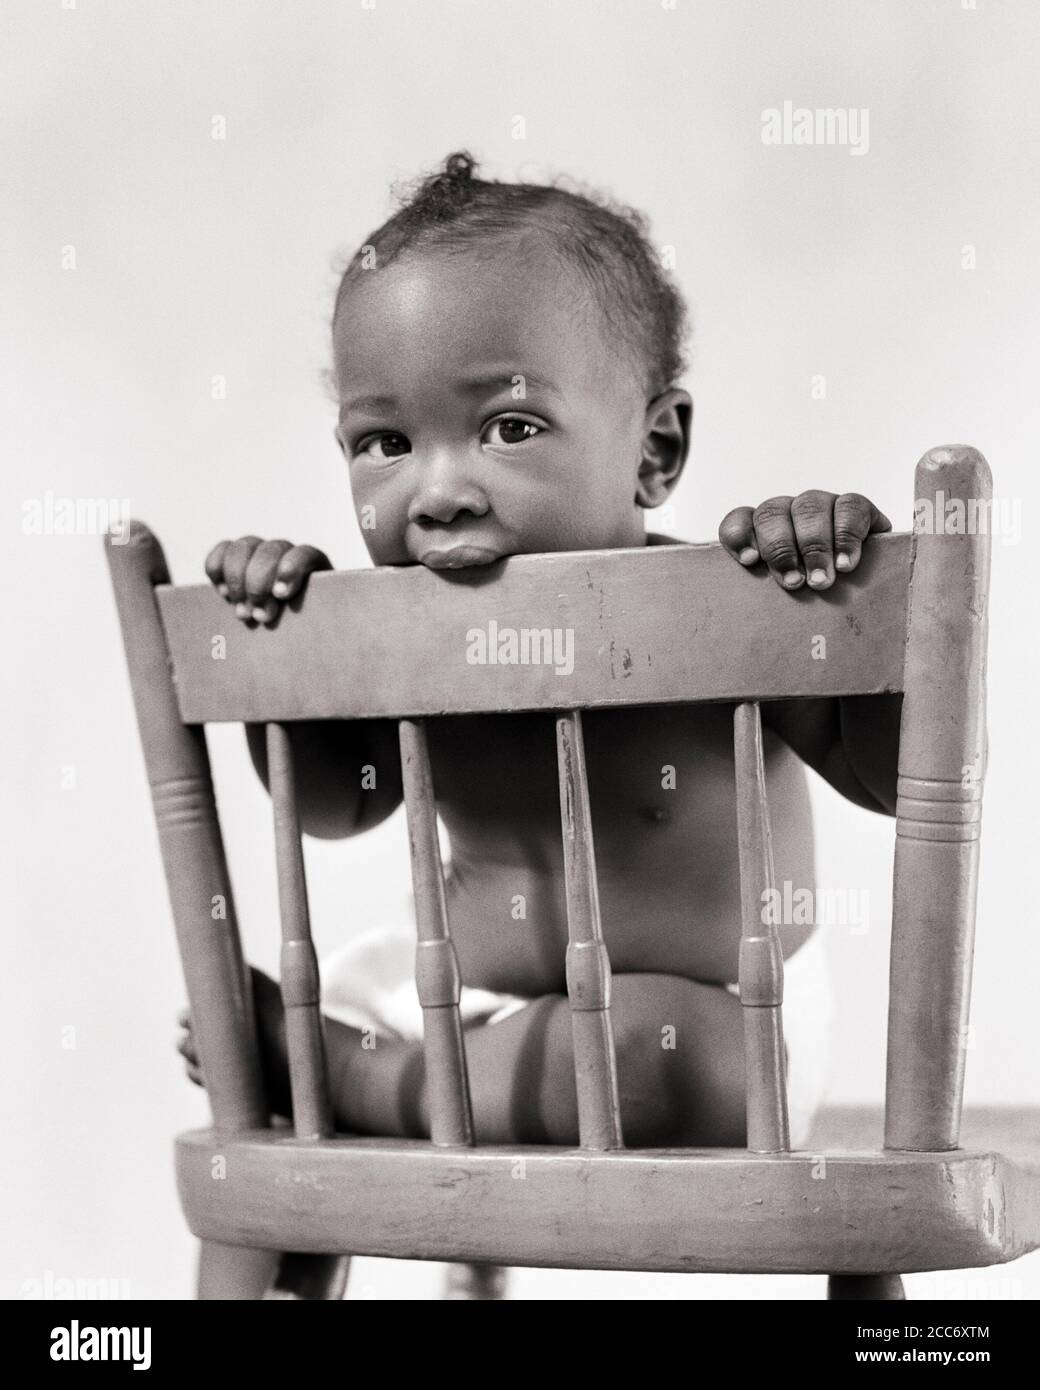 https://c8.alamy.com/comp/2CC6XTM/1940s-teething-african-american-baby-boy-looking-at-camera-sitting-chewing-on-back-of-painted-chair-n249-har001-hars-parenting-chewing-healthiness-illness-home-life-copy-space-full-length-danger-males-risk-bw-sadness-eye-contact-healthcare-temptation-wellness-prevention-protection-strength-healing-african-americans-african-american-diagnosis-black-ethnicity-pride-health-care-of-on-impairment-painted-treatment-baby-teeth-conceptual-lead-baby-boy-caution-deciduous-teeth-growth-juveniles-milk-teeth-black-and-white-disease-har001-old-fashioned-teething-african-americans-2CC6XTM.jpg